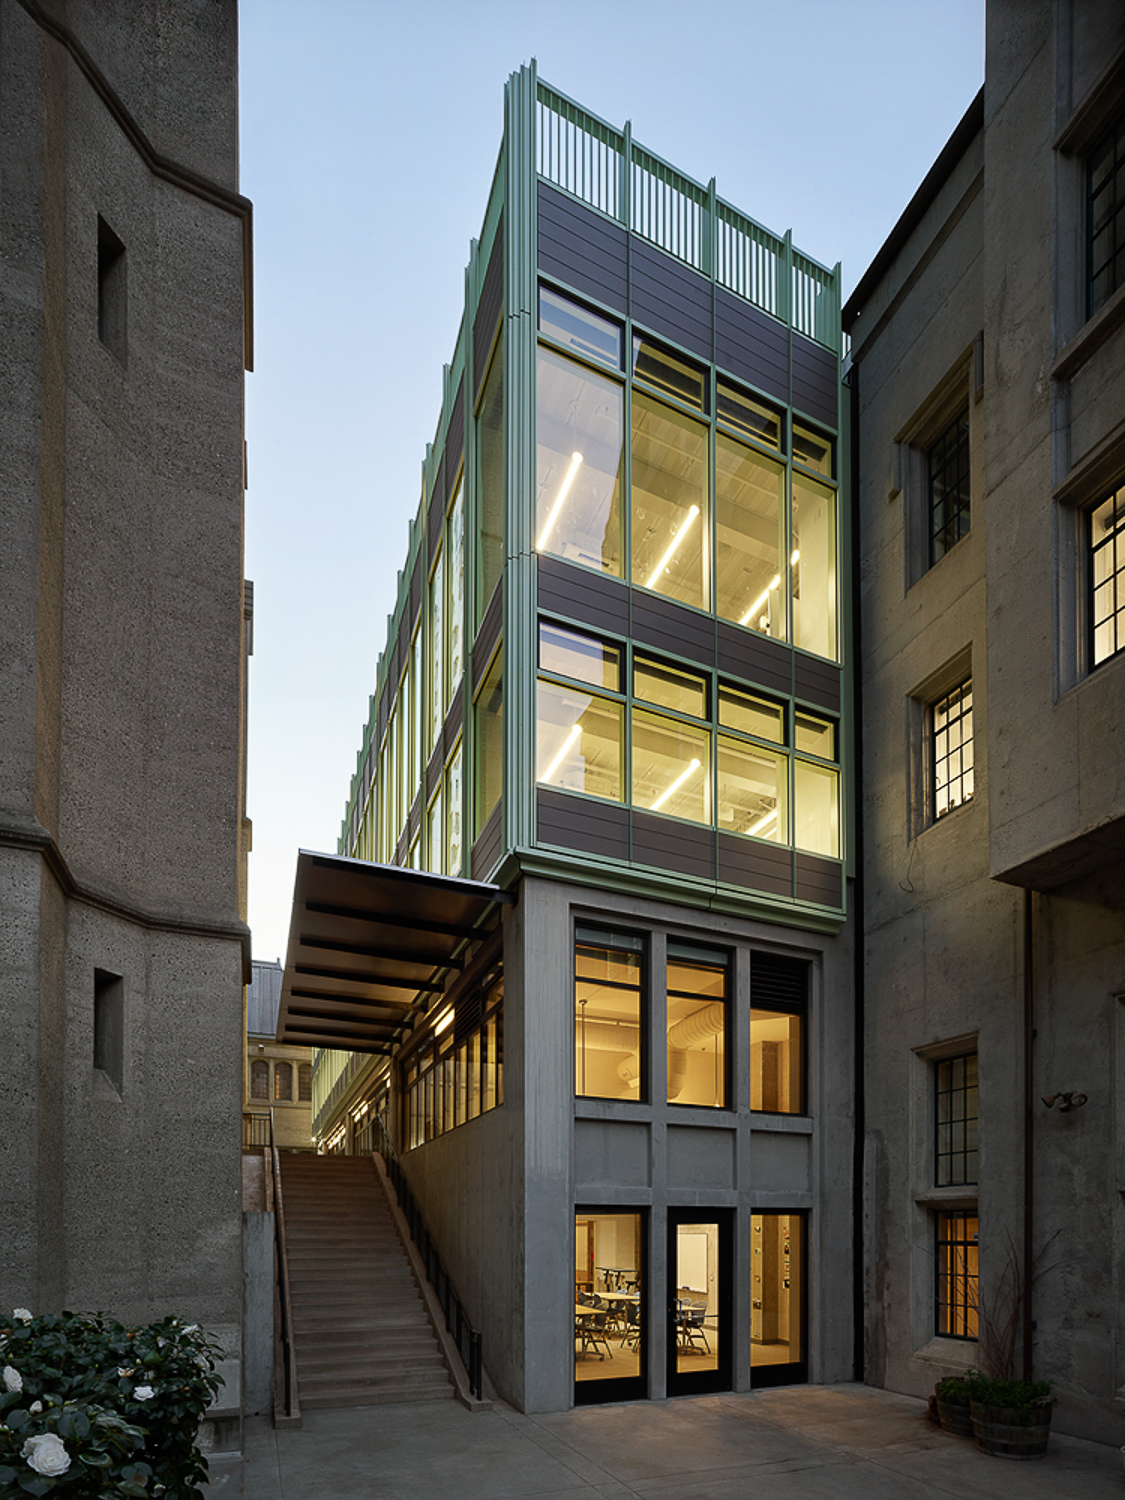 Cathedral School new building, photograph by Matthew Millman courtesy Bloszies Offices